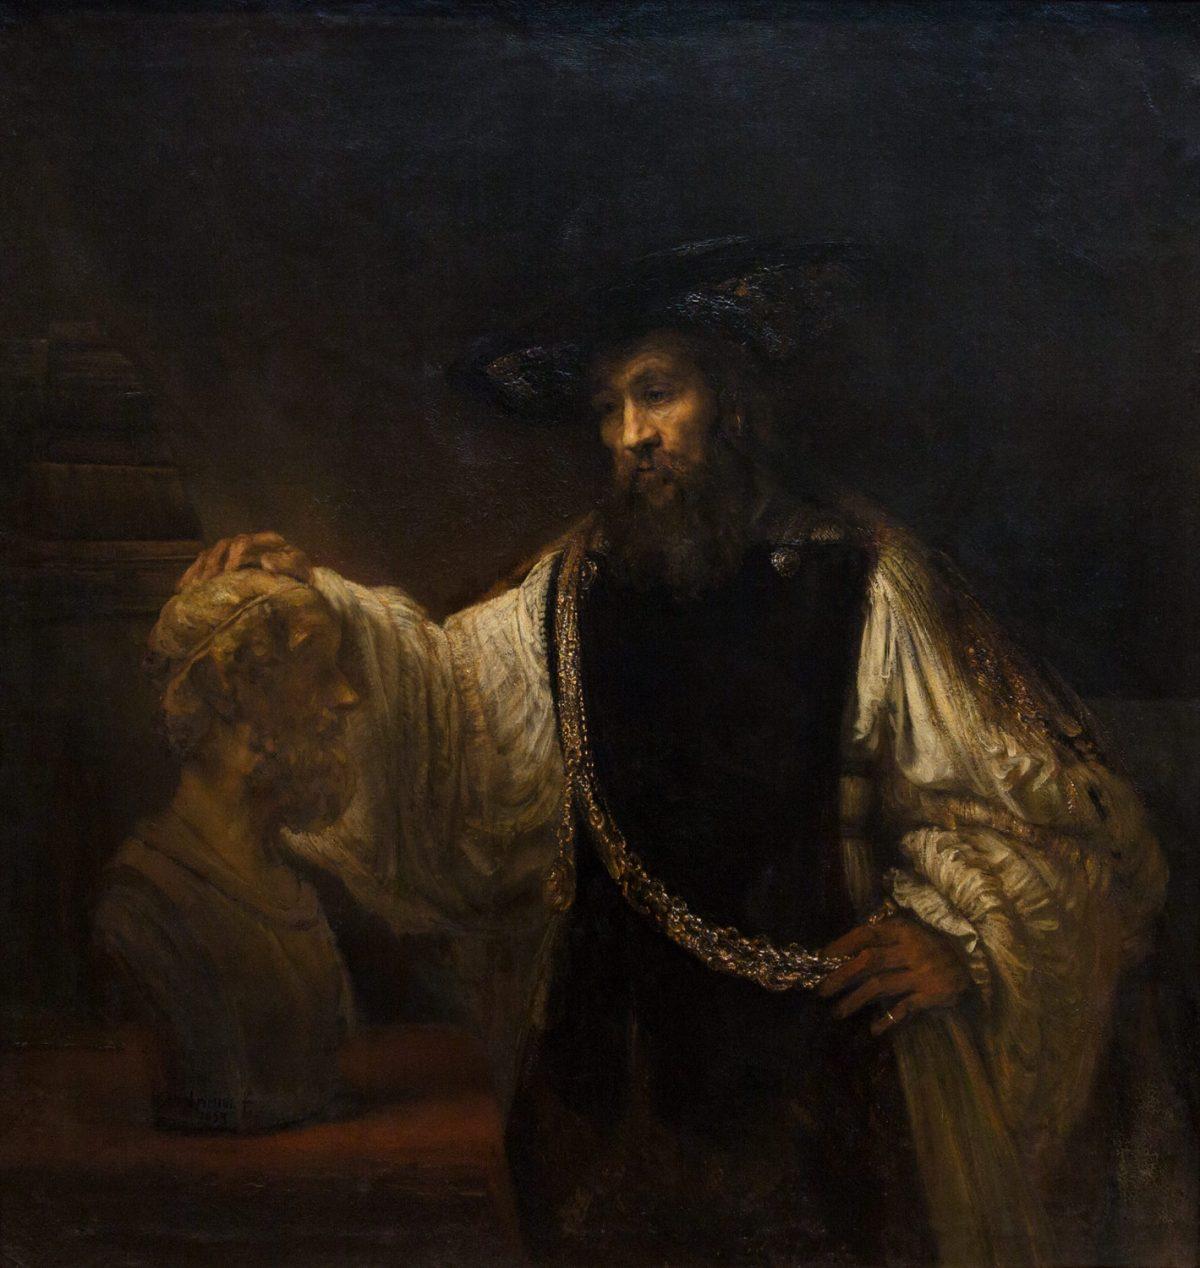 “Aristotle With a Bust of Homer,” 1653, by Rembrandt van Rijn. Oil on canvas, 56 1/2 inches by 53 3/4 inches. Purchase, special contributions and funds given or bequeathed by friends of the Museum, 1961. (The Metropolitan Museum of Art, New York)